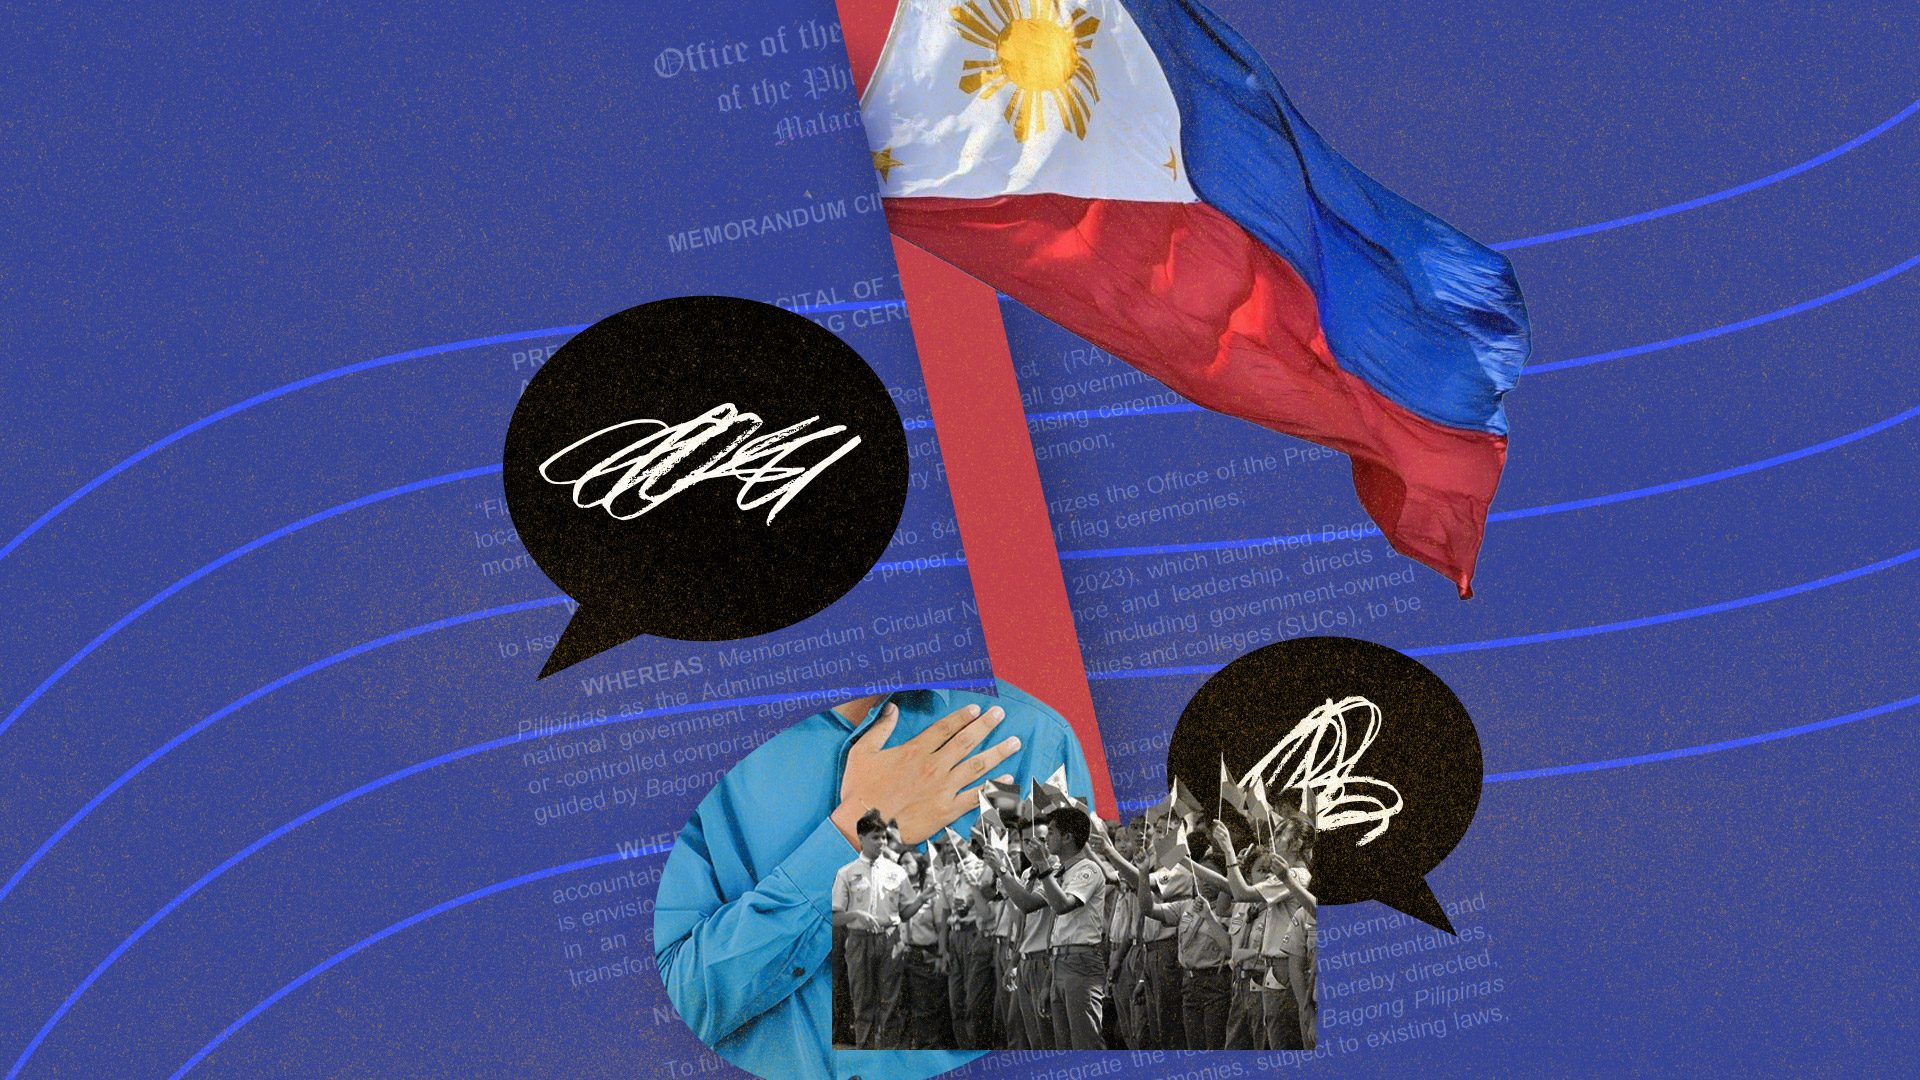 [OPINION] What’s the fuss about ‘Bagong Pilipinas?’ It’s mediocre pop.